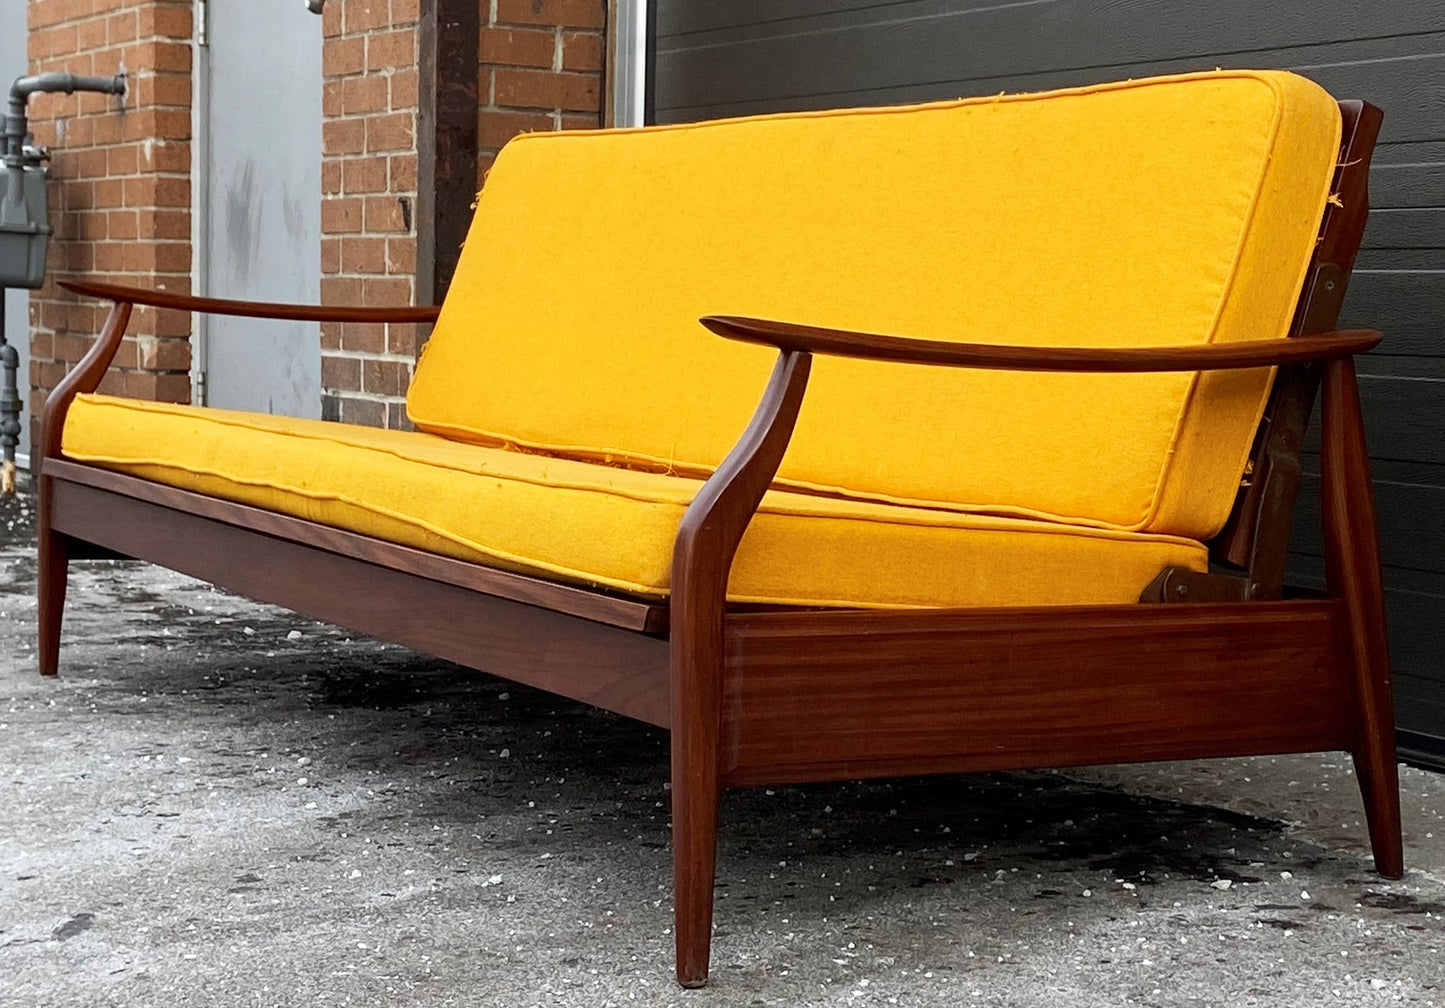 REFINISHED Mid Century Modern Solid Teak Sofa - Bed will get NEW CUSHIONS